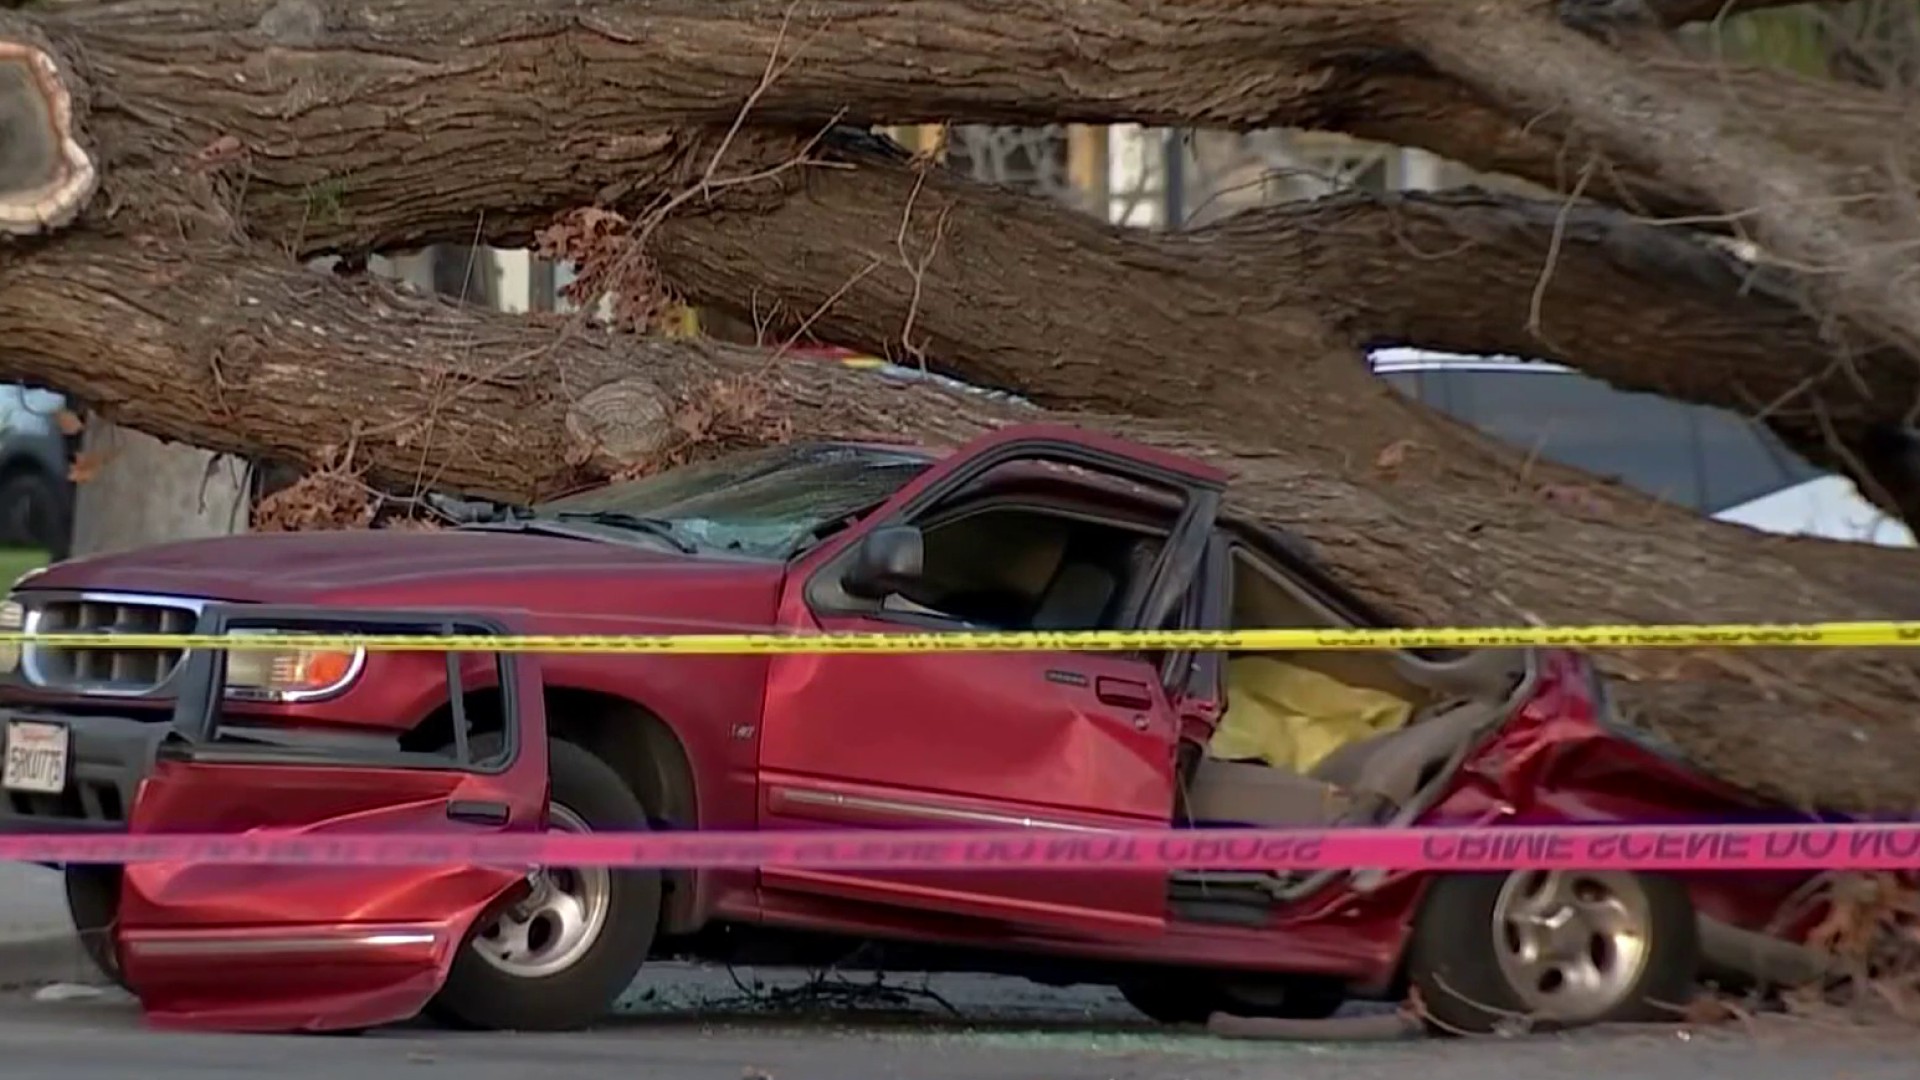 Anaheim Mom Dies After Tree Falls on Car as Son Played Nearby